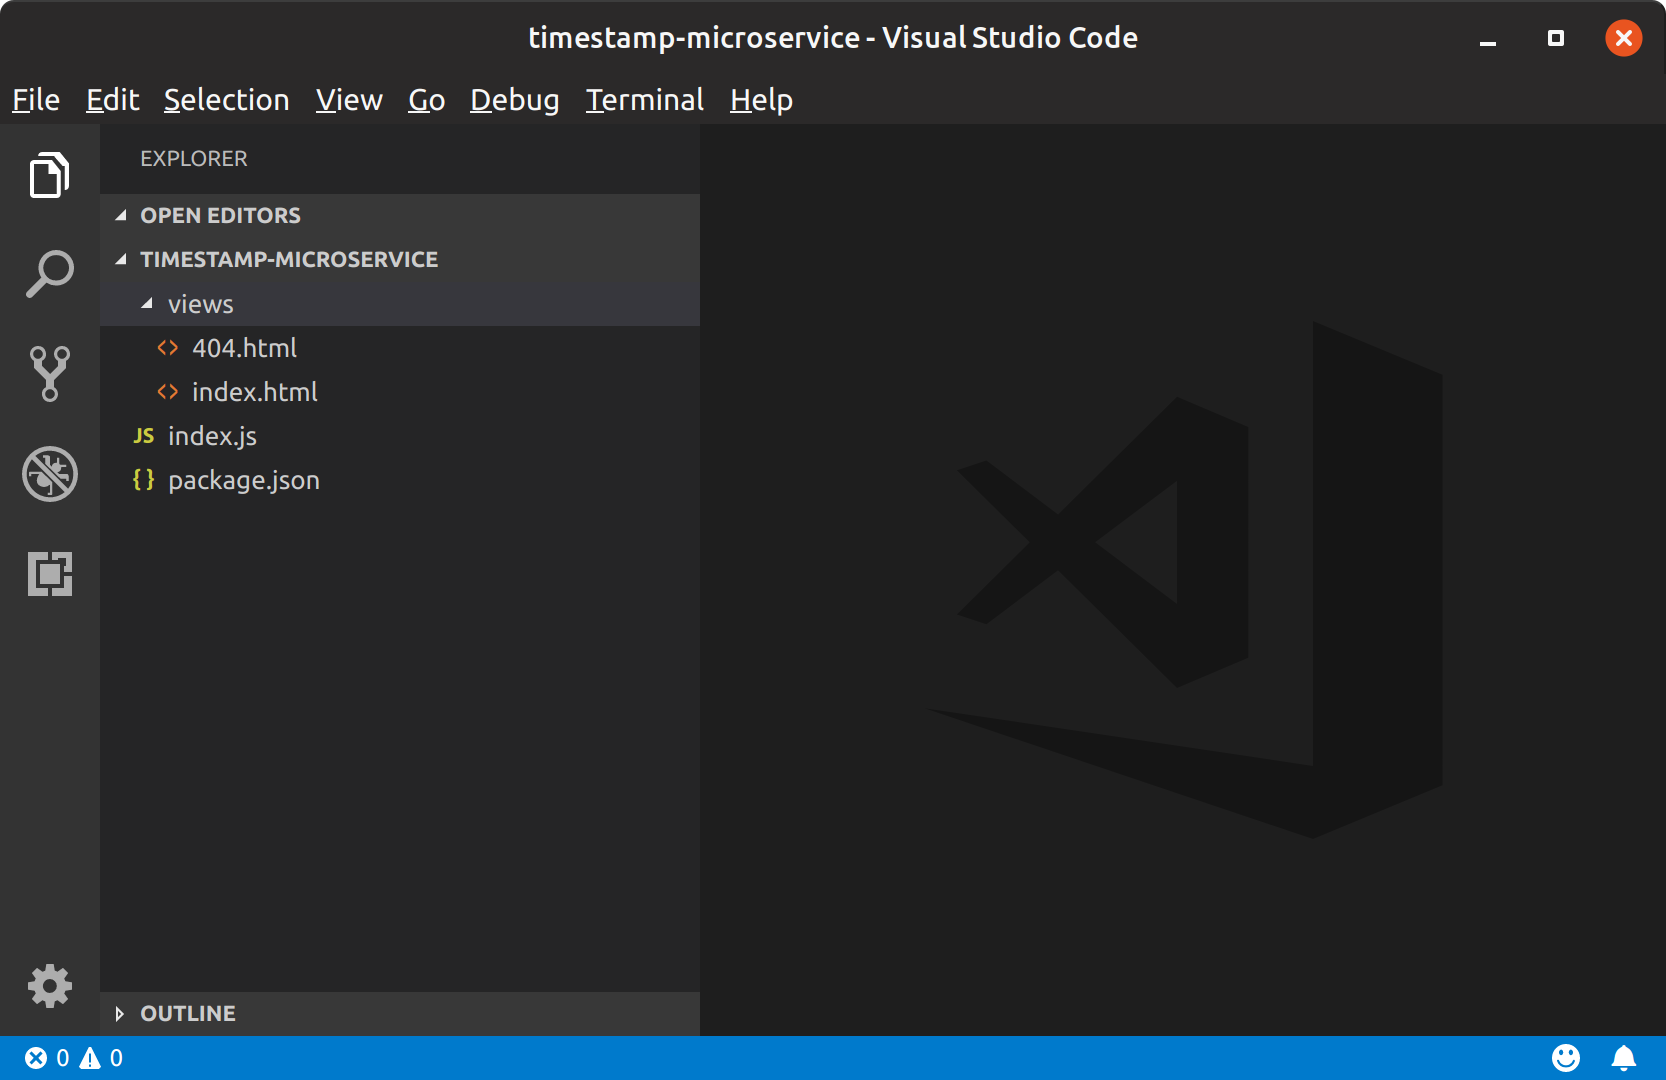 Visual Studio Code showing the project directory structure